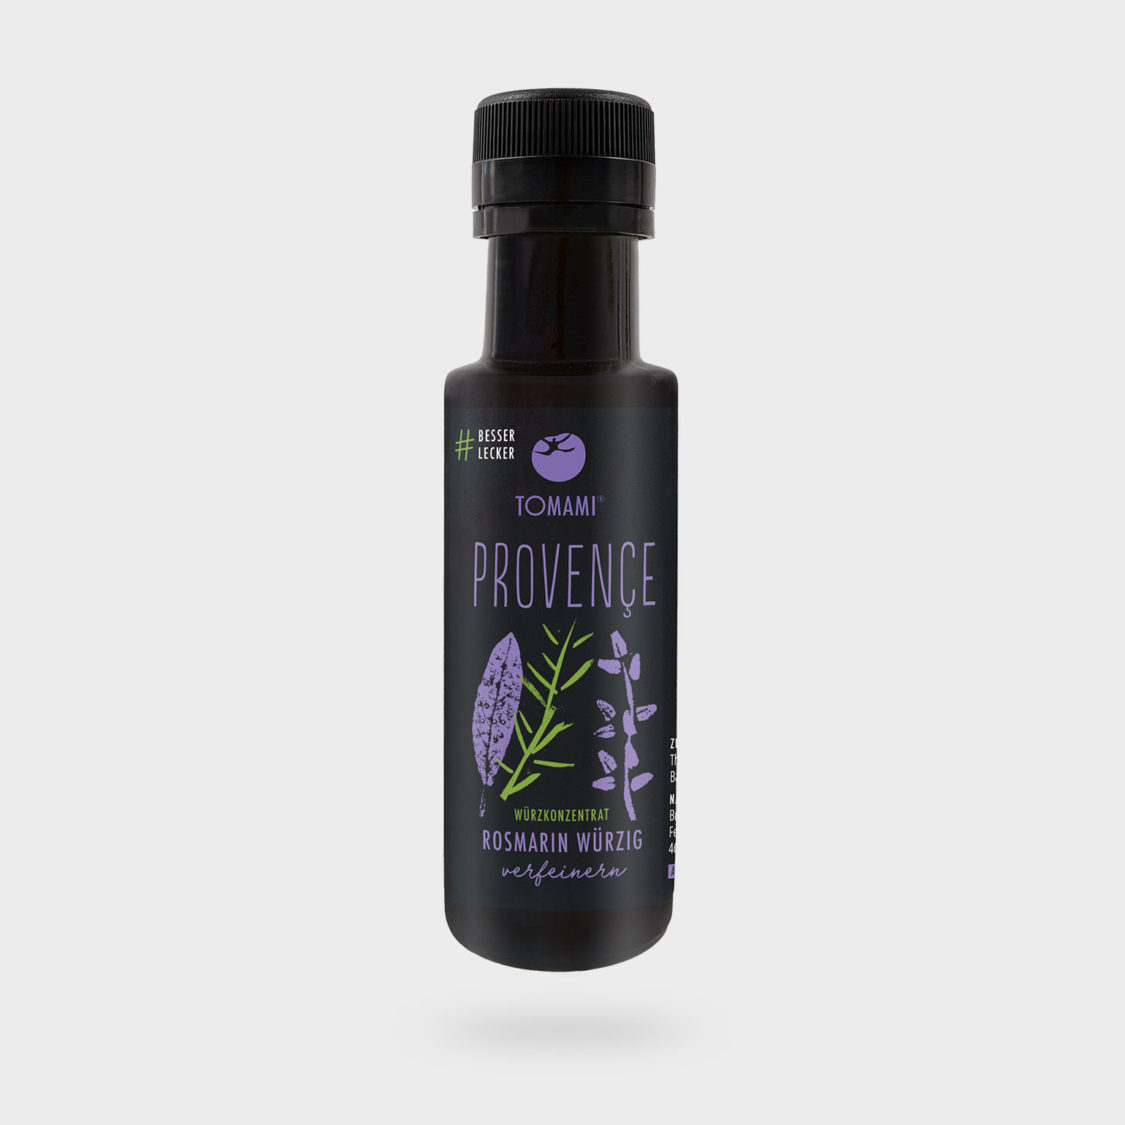 TOMAMI Provence 90 ml Flasche